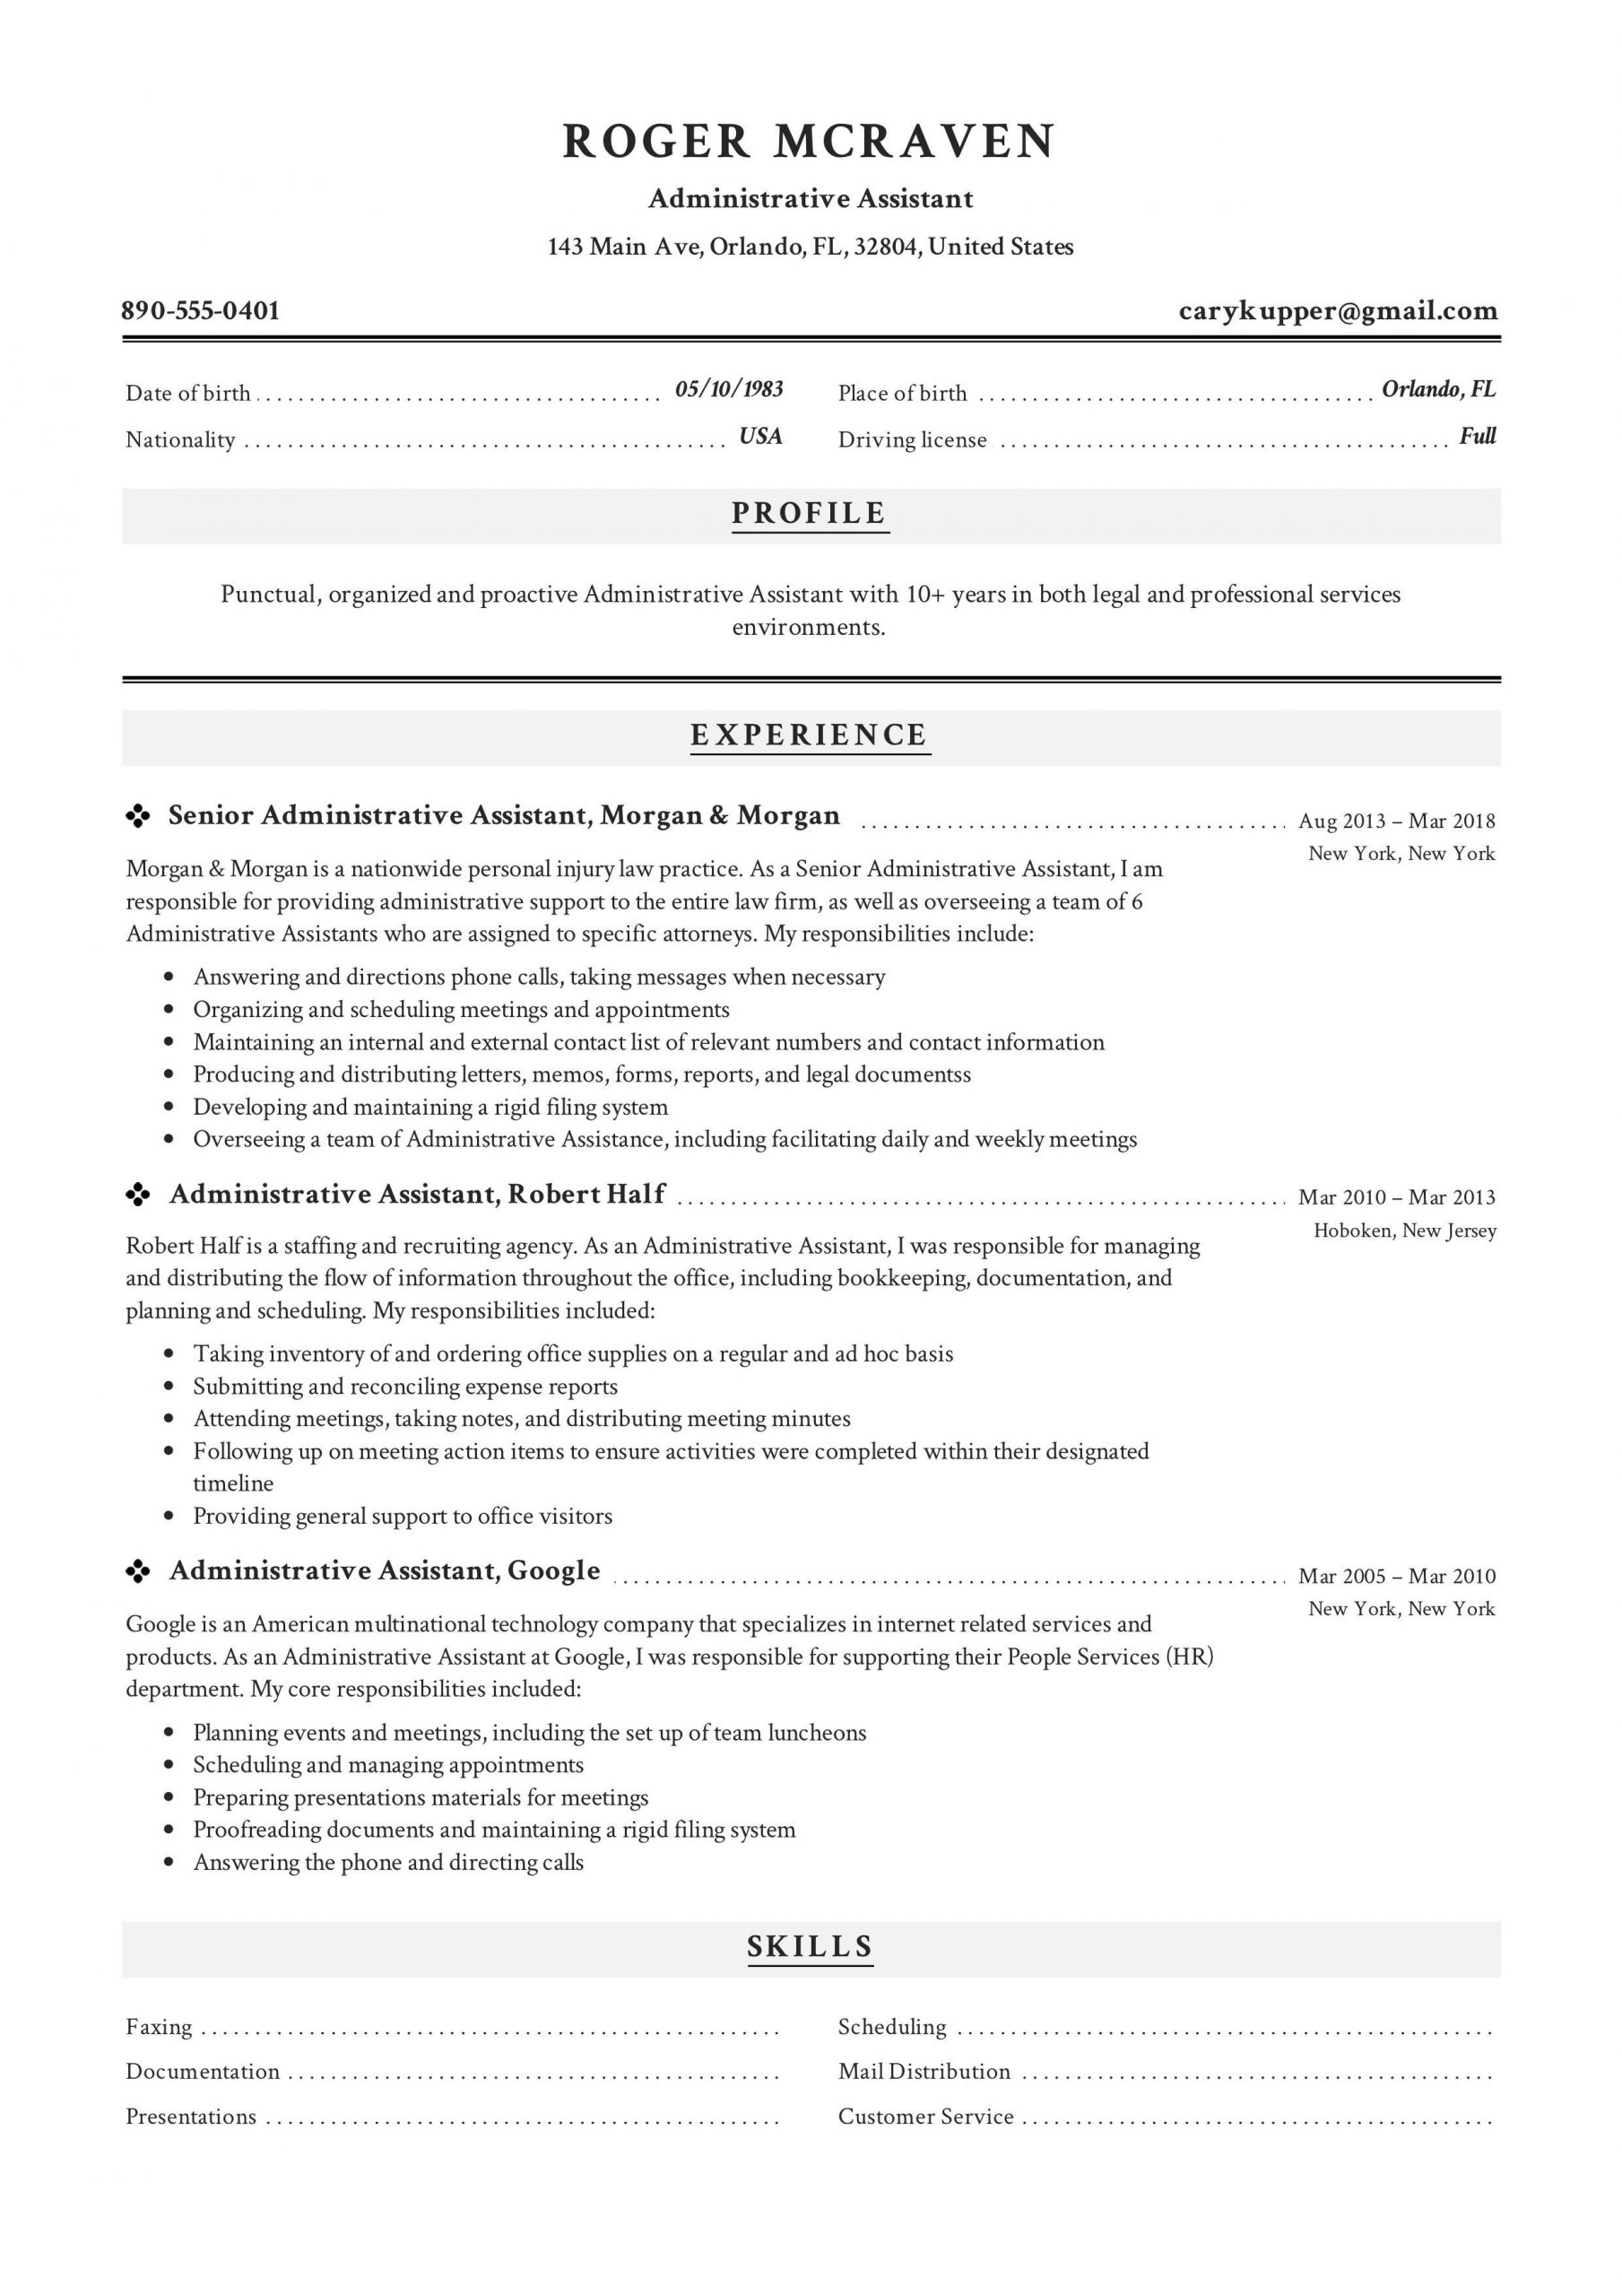 Sample Resume Templates for Administrative assistant Free Administrative assistant Resume Sample, Template, Example, Cv …